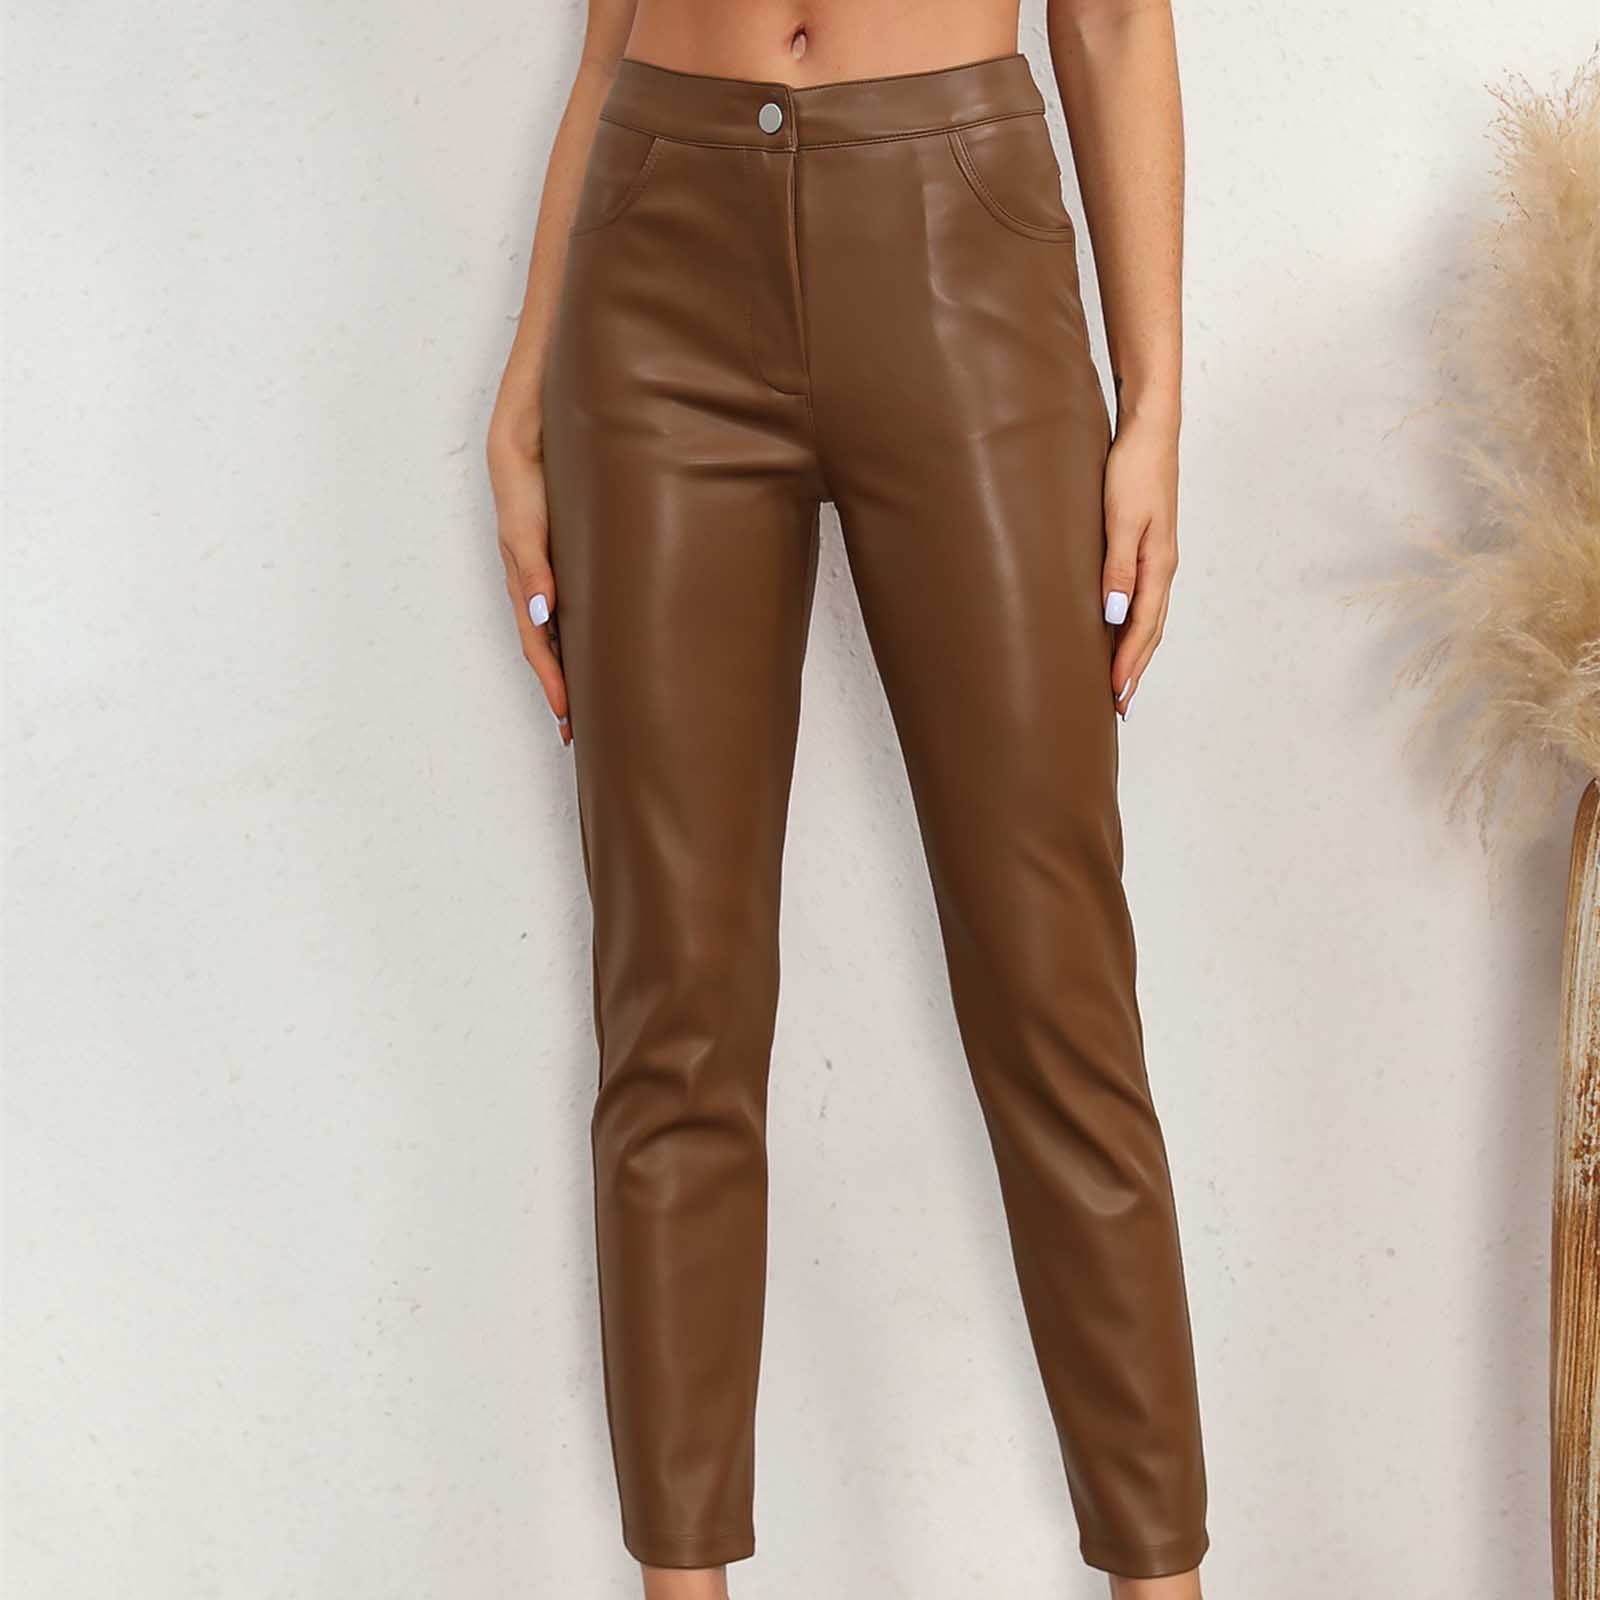 uublik Faux Leather Pants for Women Casual High Rise Pockets Button ...